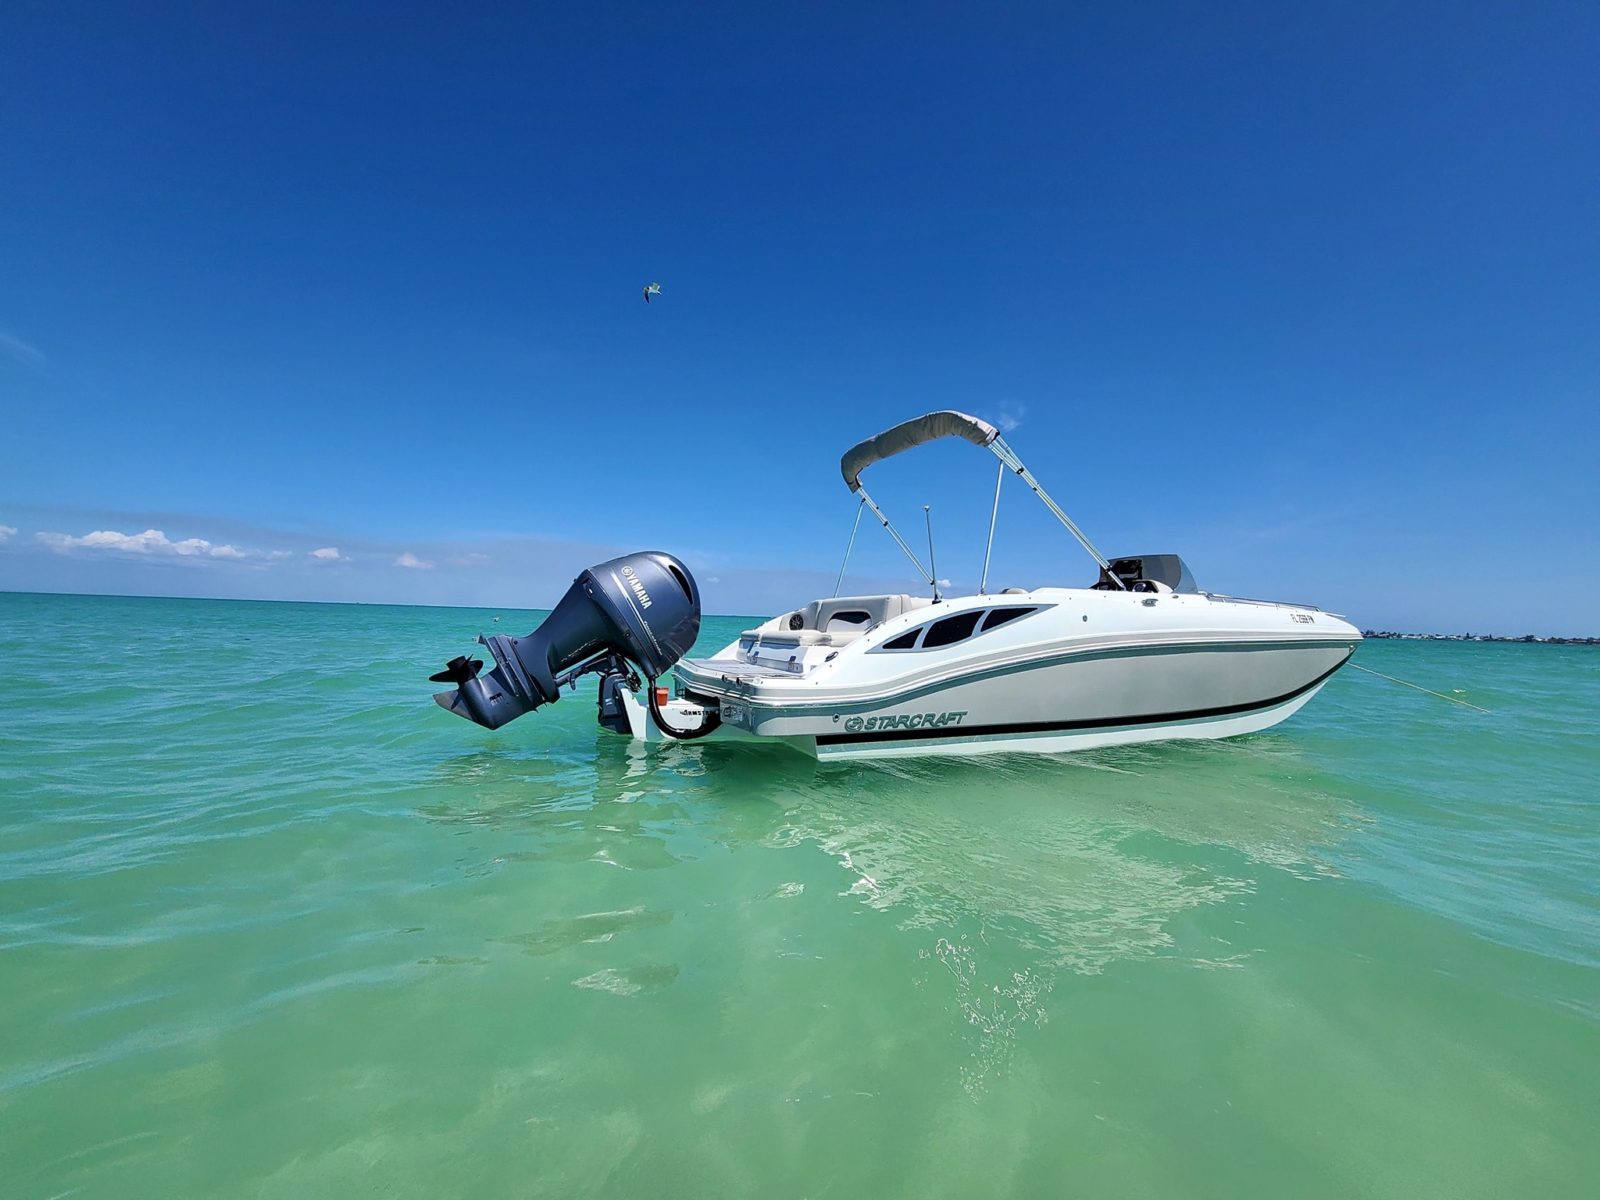 Where to Go for Anna Maria Island Boat Rentals